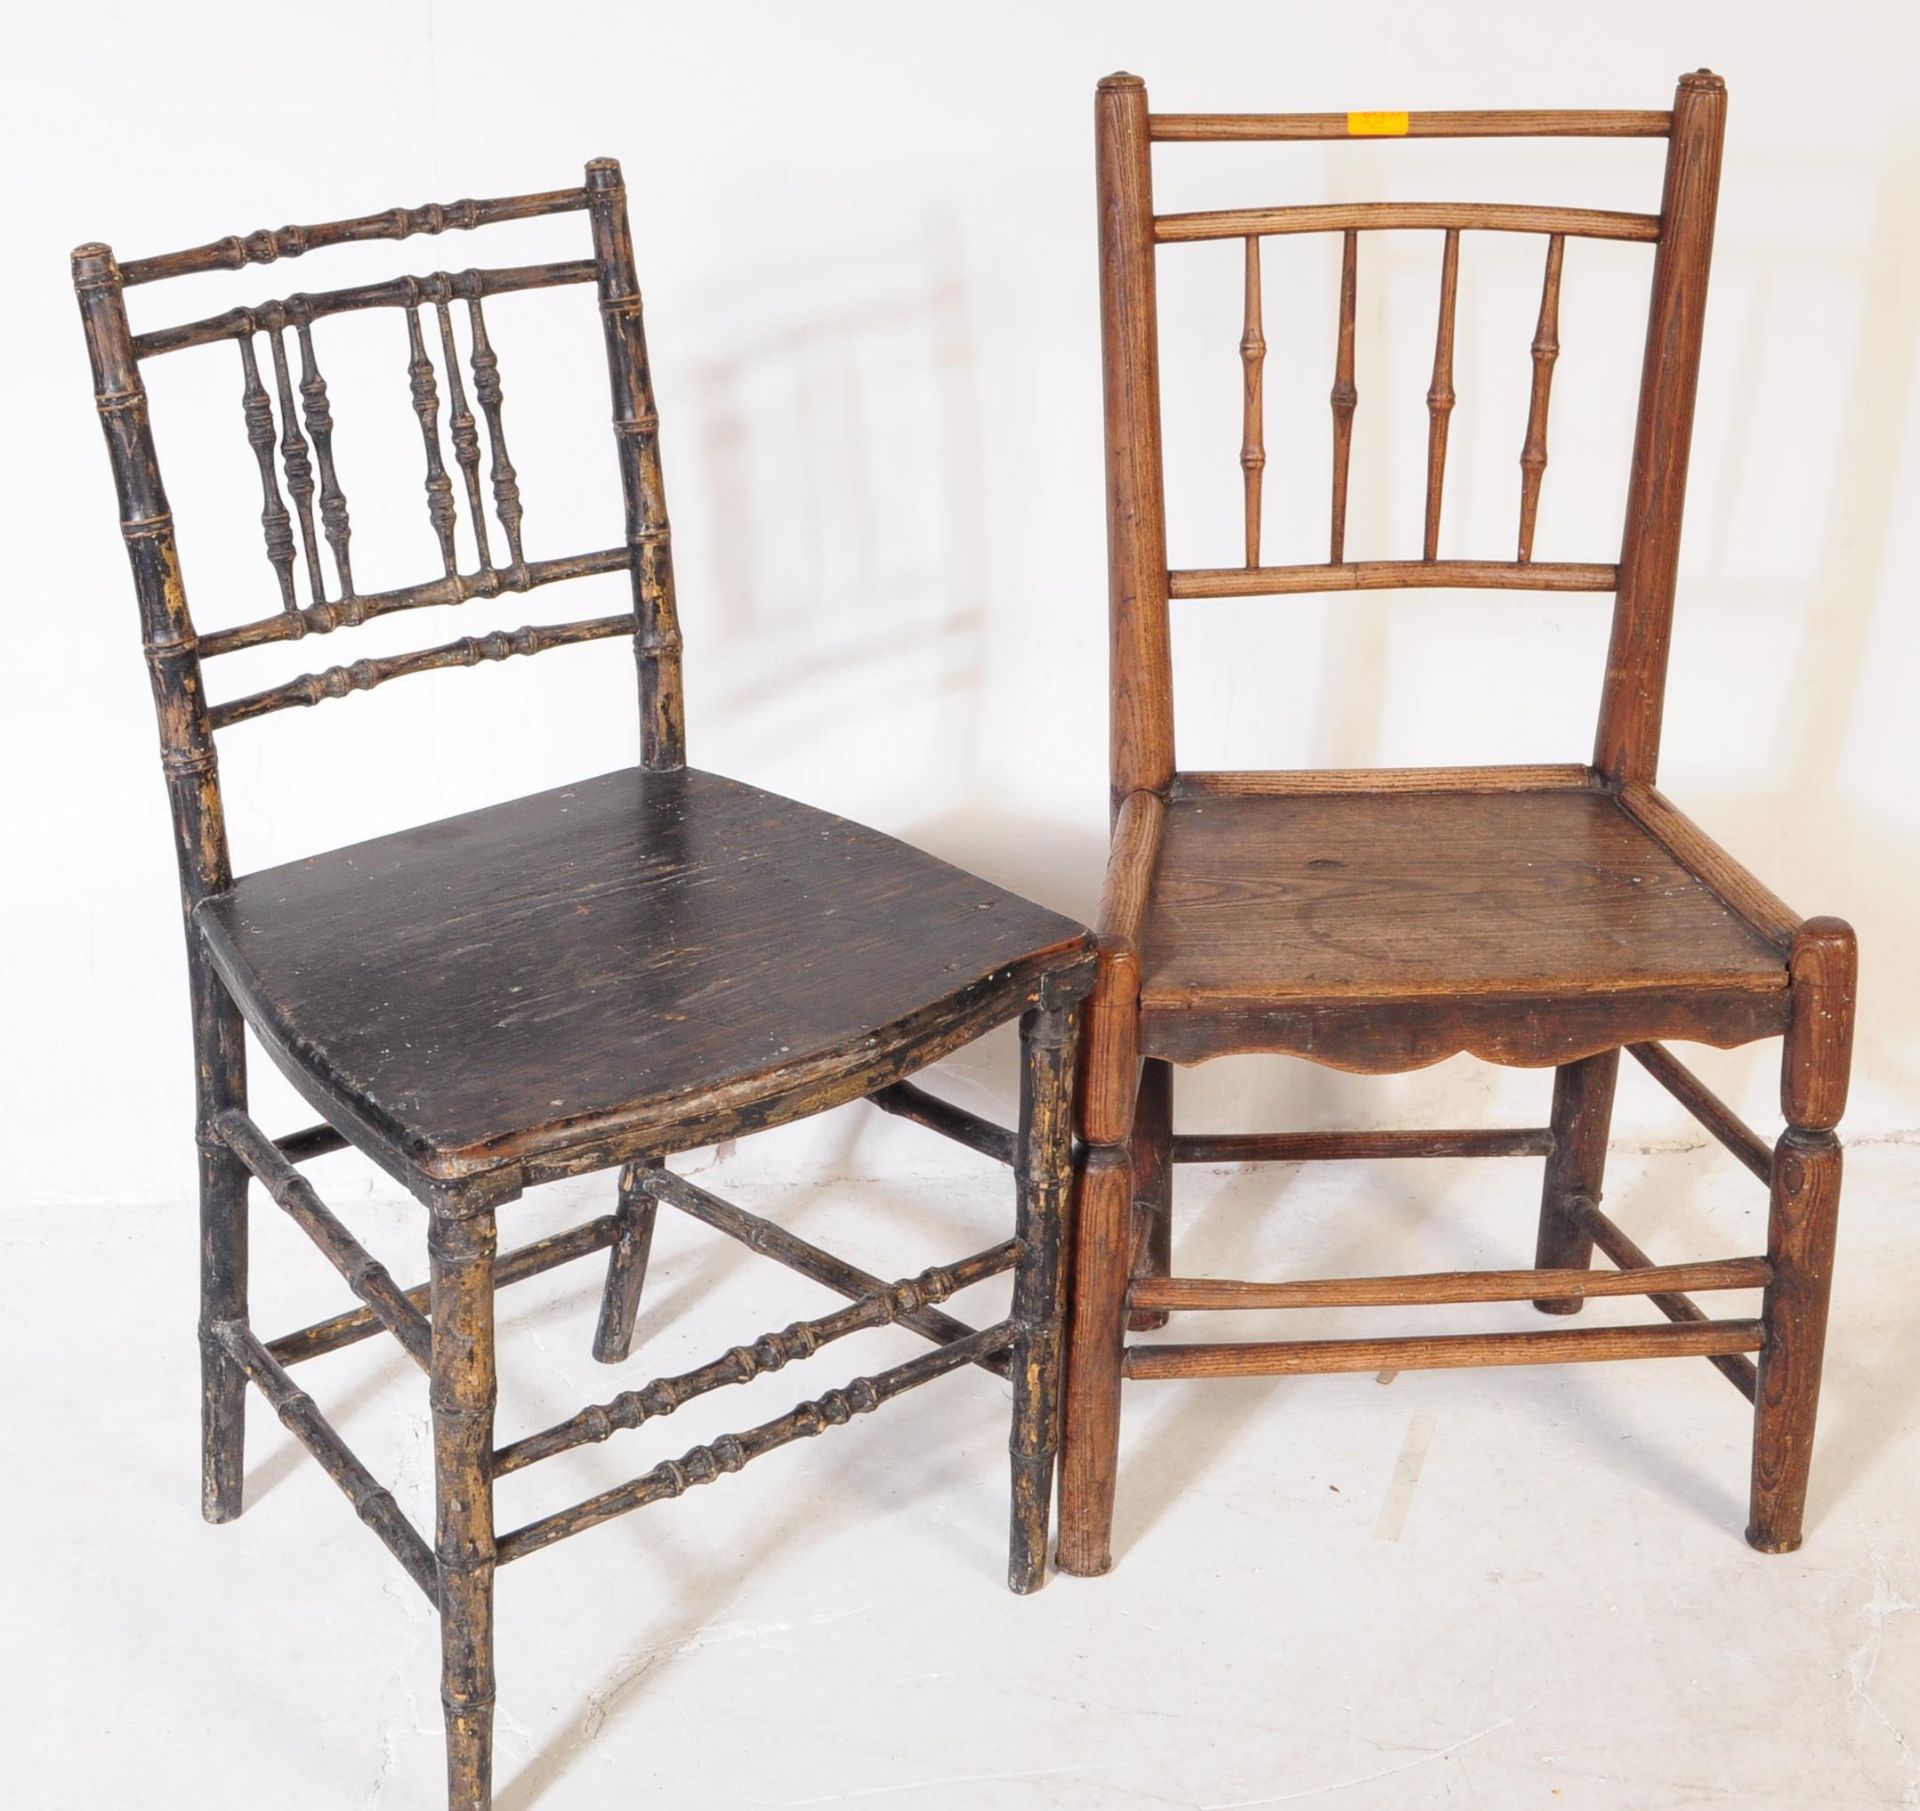 TWO 19TH CENTURY VICTORIAN CHAIRS - WILLIAM BIRCH MANNER - Image 2 of 8